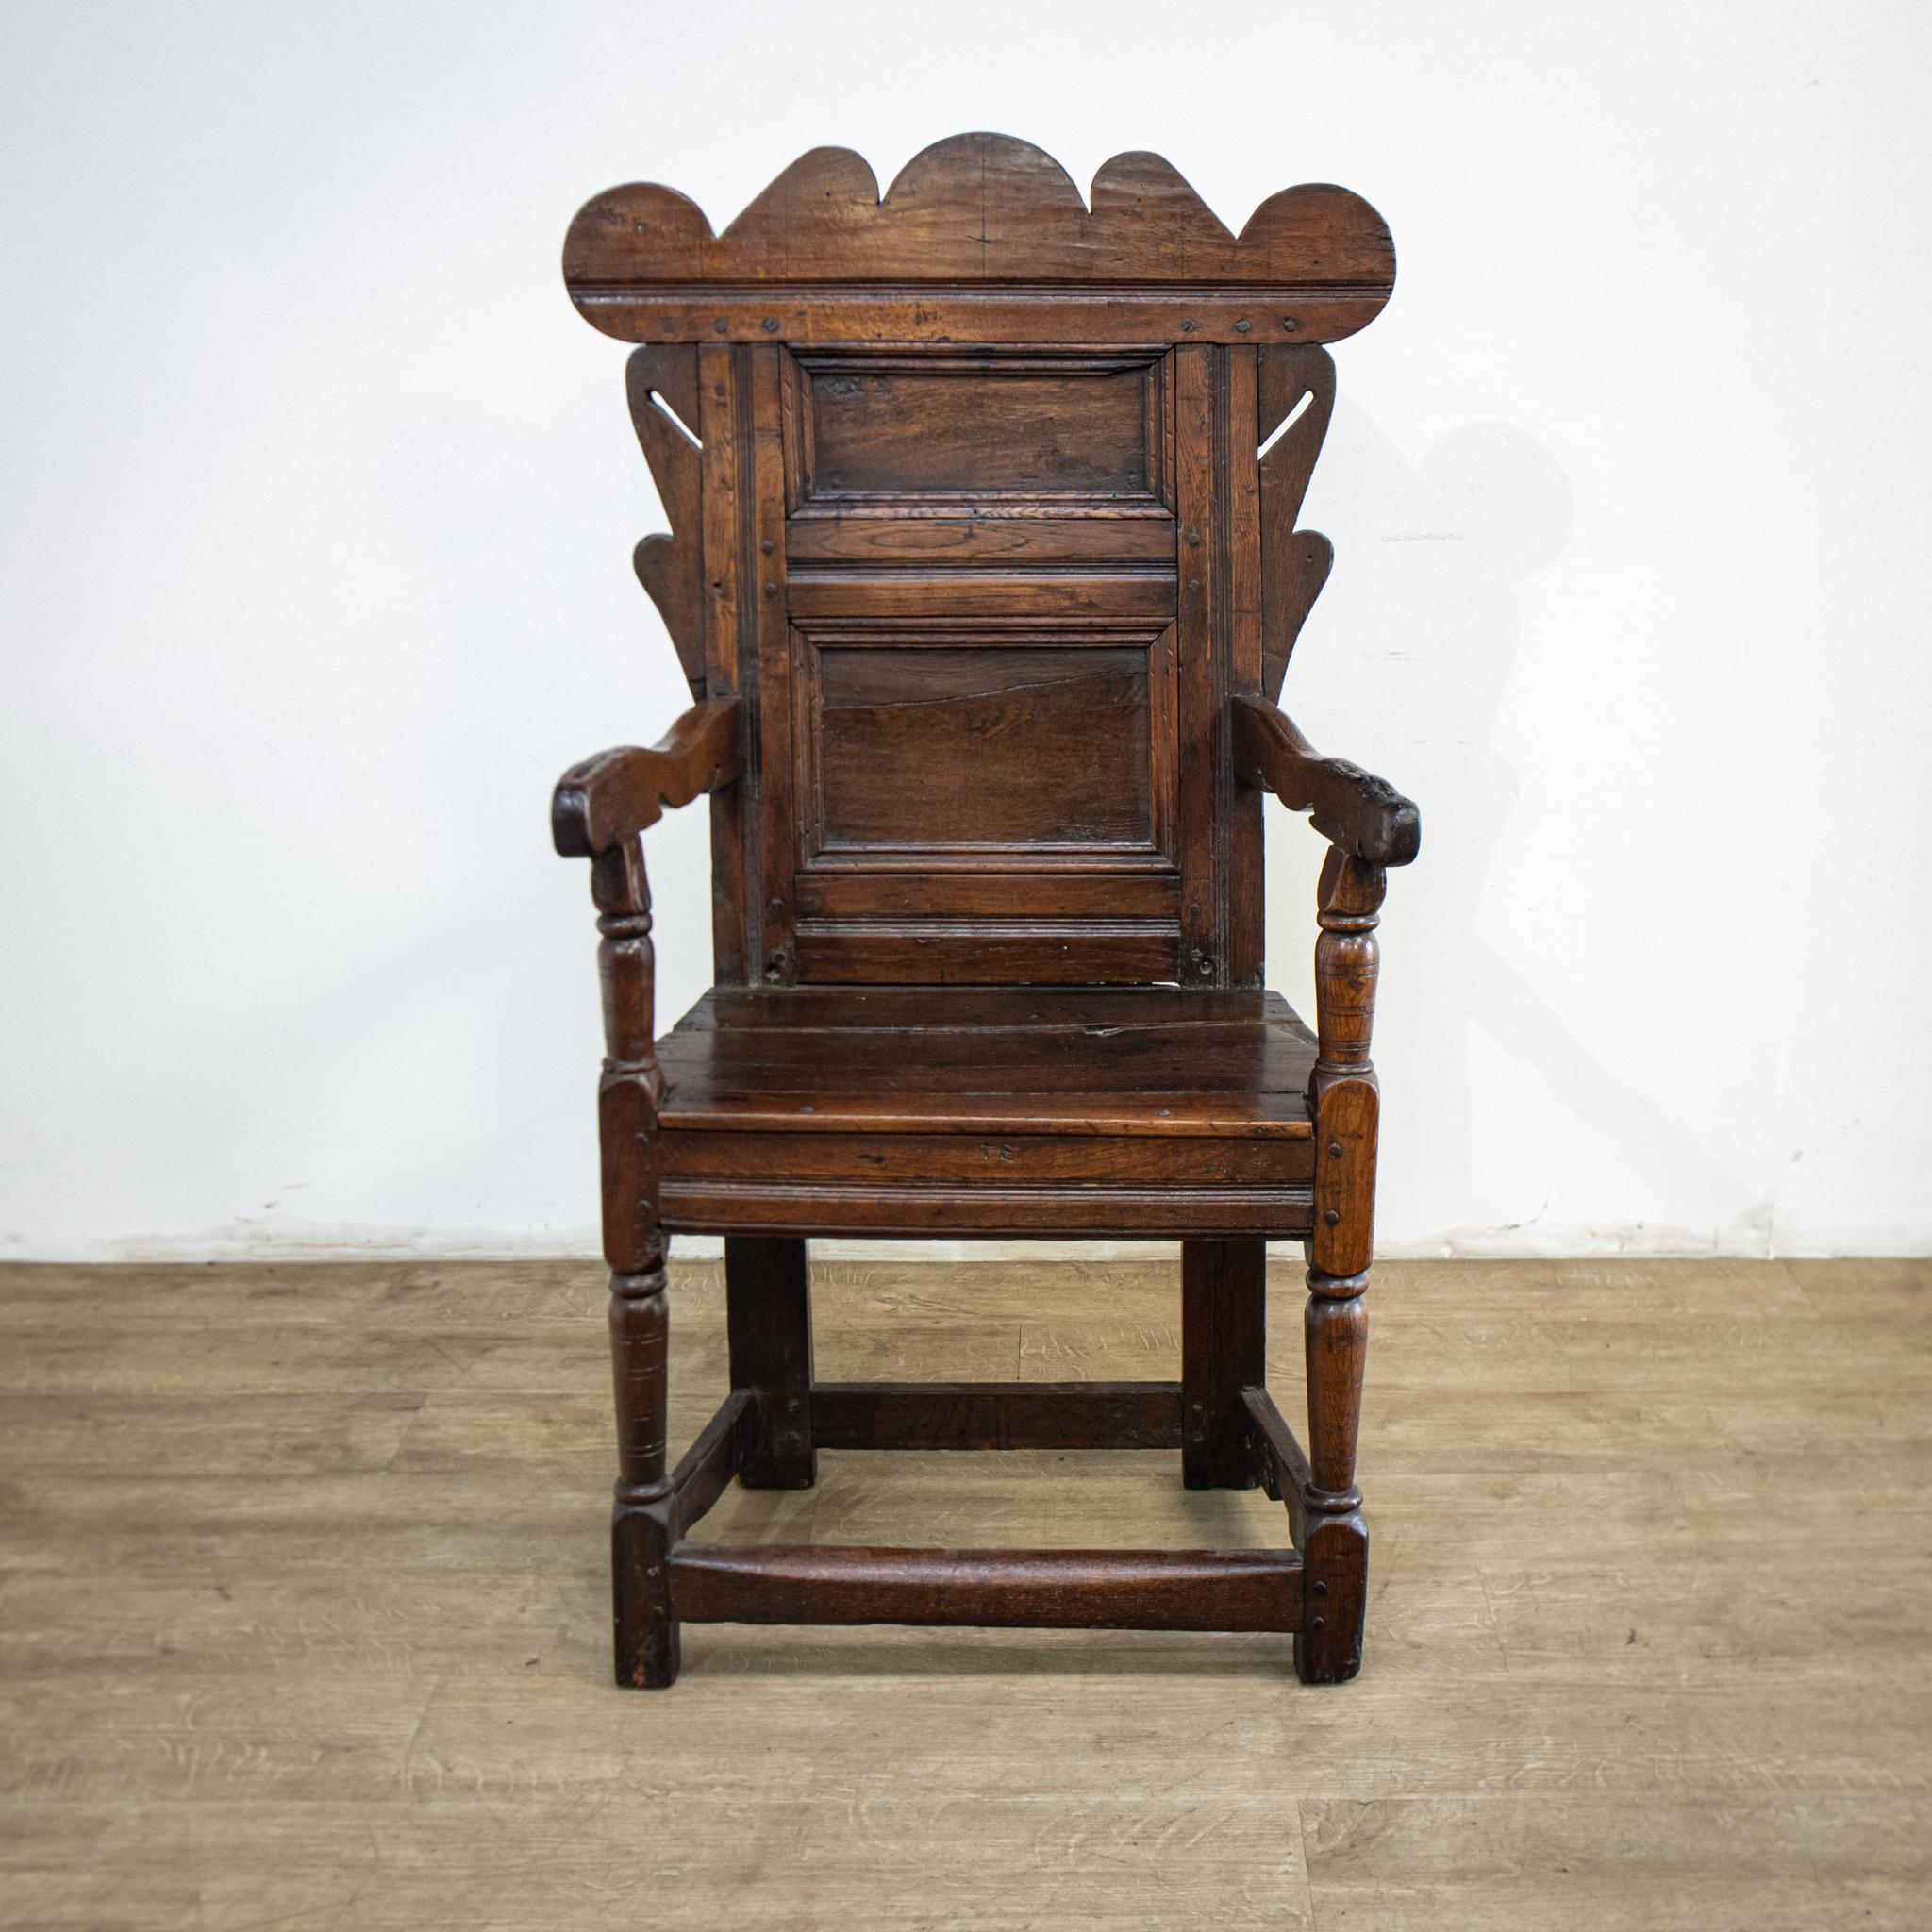 A real antique, this 18th century rustic wainscot chair has a carved shaped top rail above a panelled back, with turned front legs, square section back legs and carved arm supports. These early chairs were named after the fine grade of oak used for